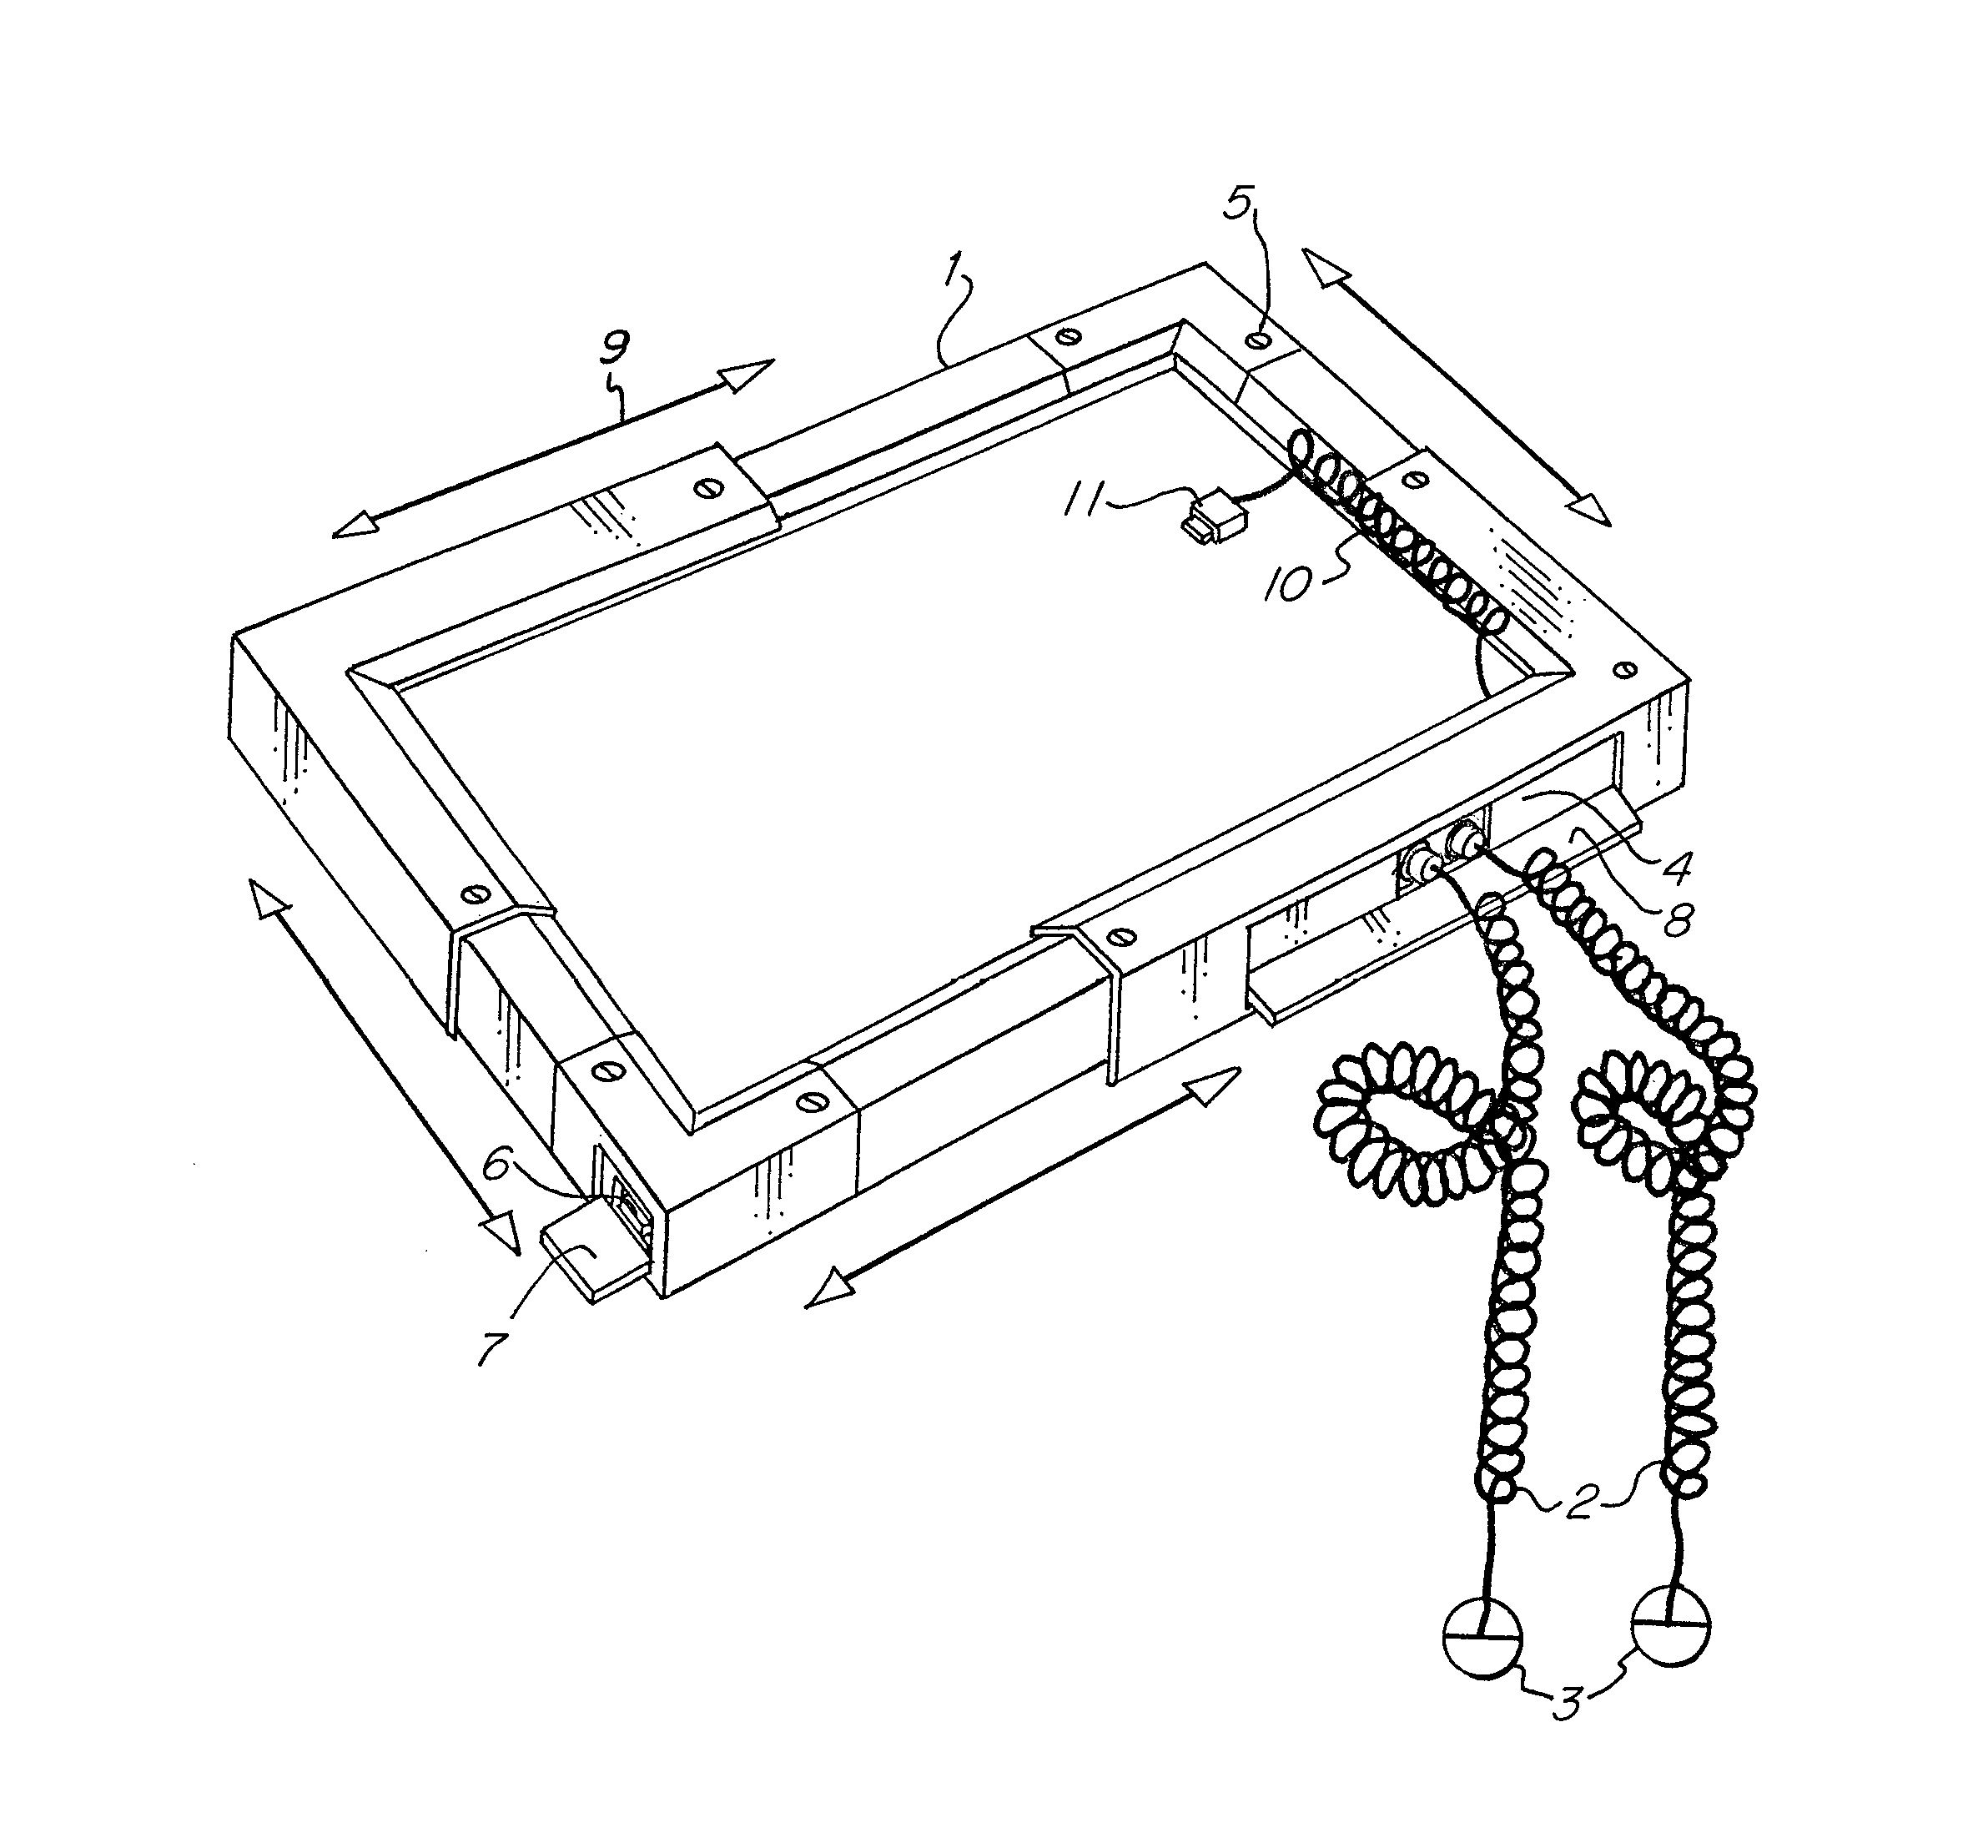 Kits and methods for retrofitting and adapting common notebooks, laptop computers, and tablets, to enable each to be used as an automated external defibrillator (AED), and as a manual defibrillator